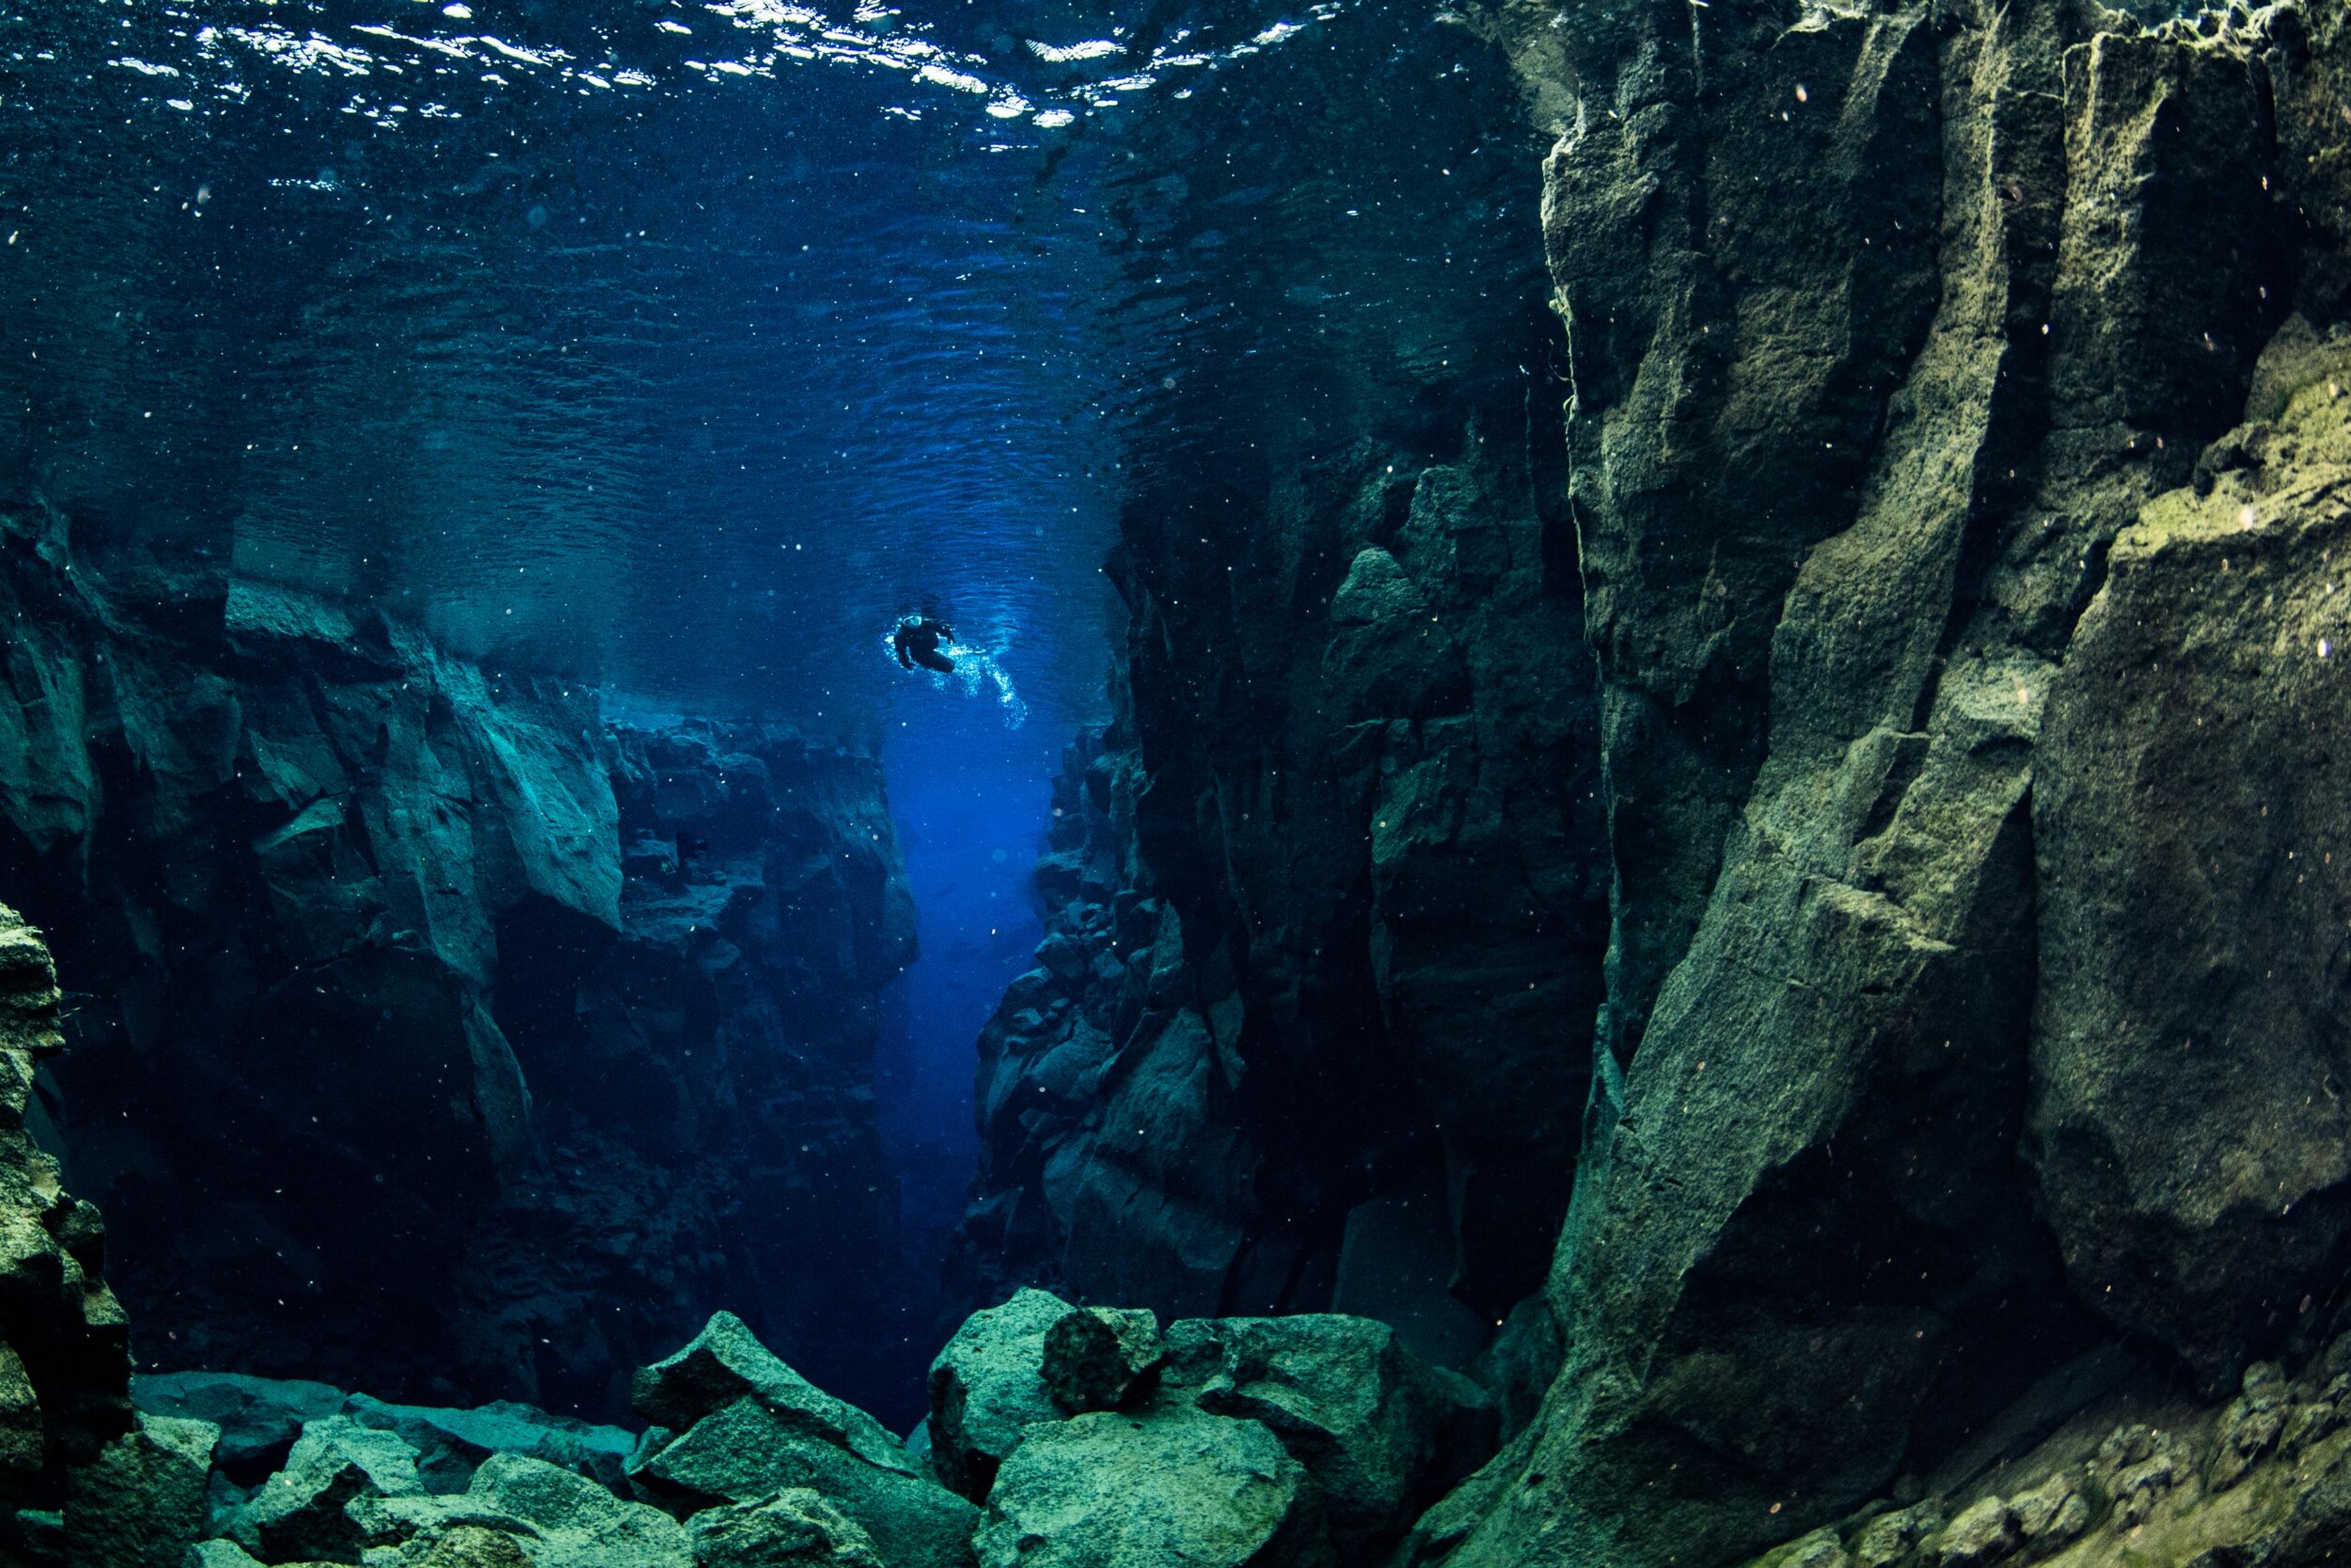 An underwater view of a diver exploring the clear, deep blue waters of a fissure between dark, jagged rock faces, creating an ethereal underwater landscape.